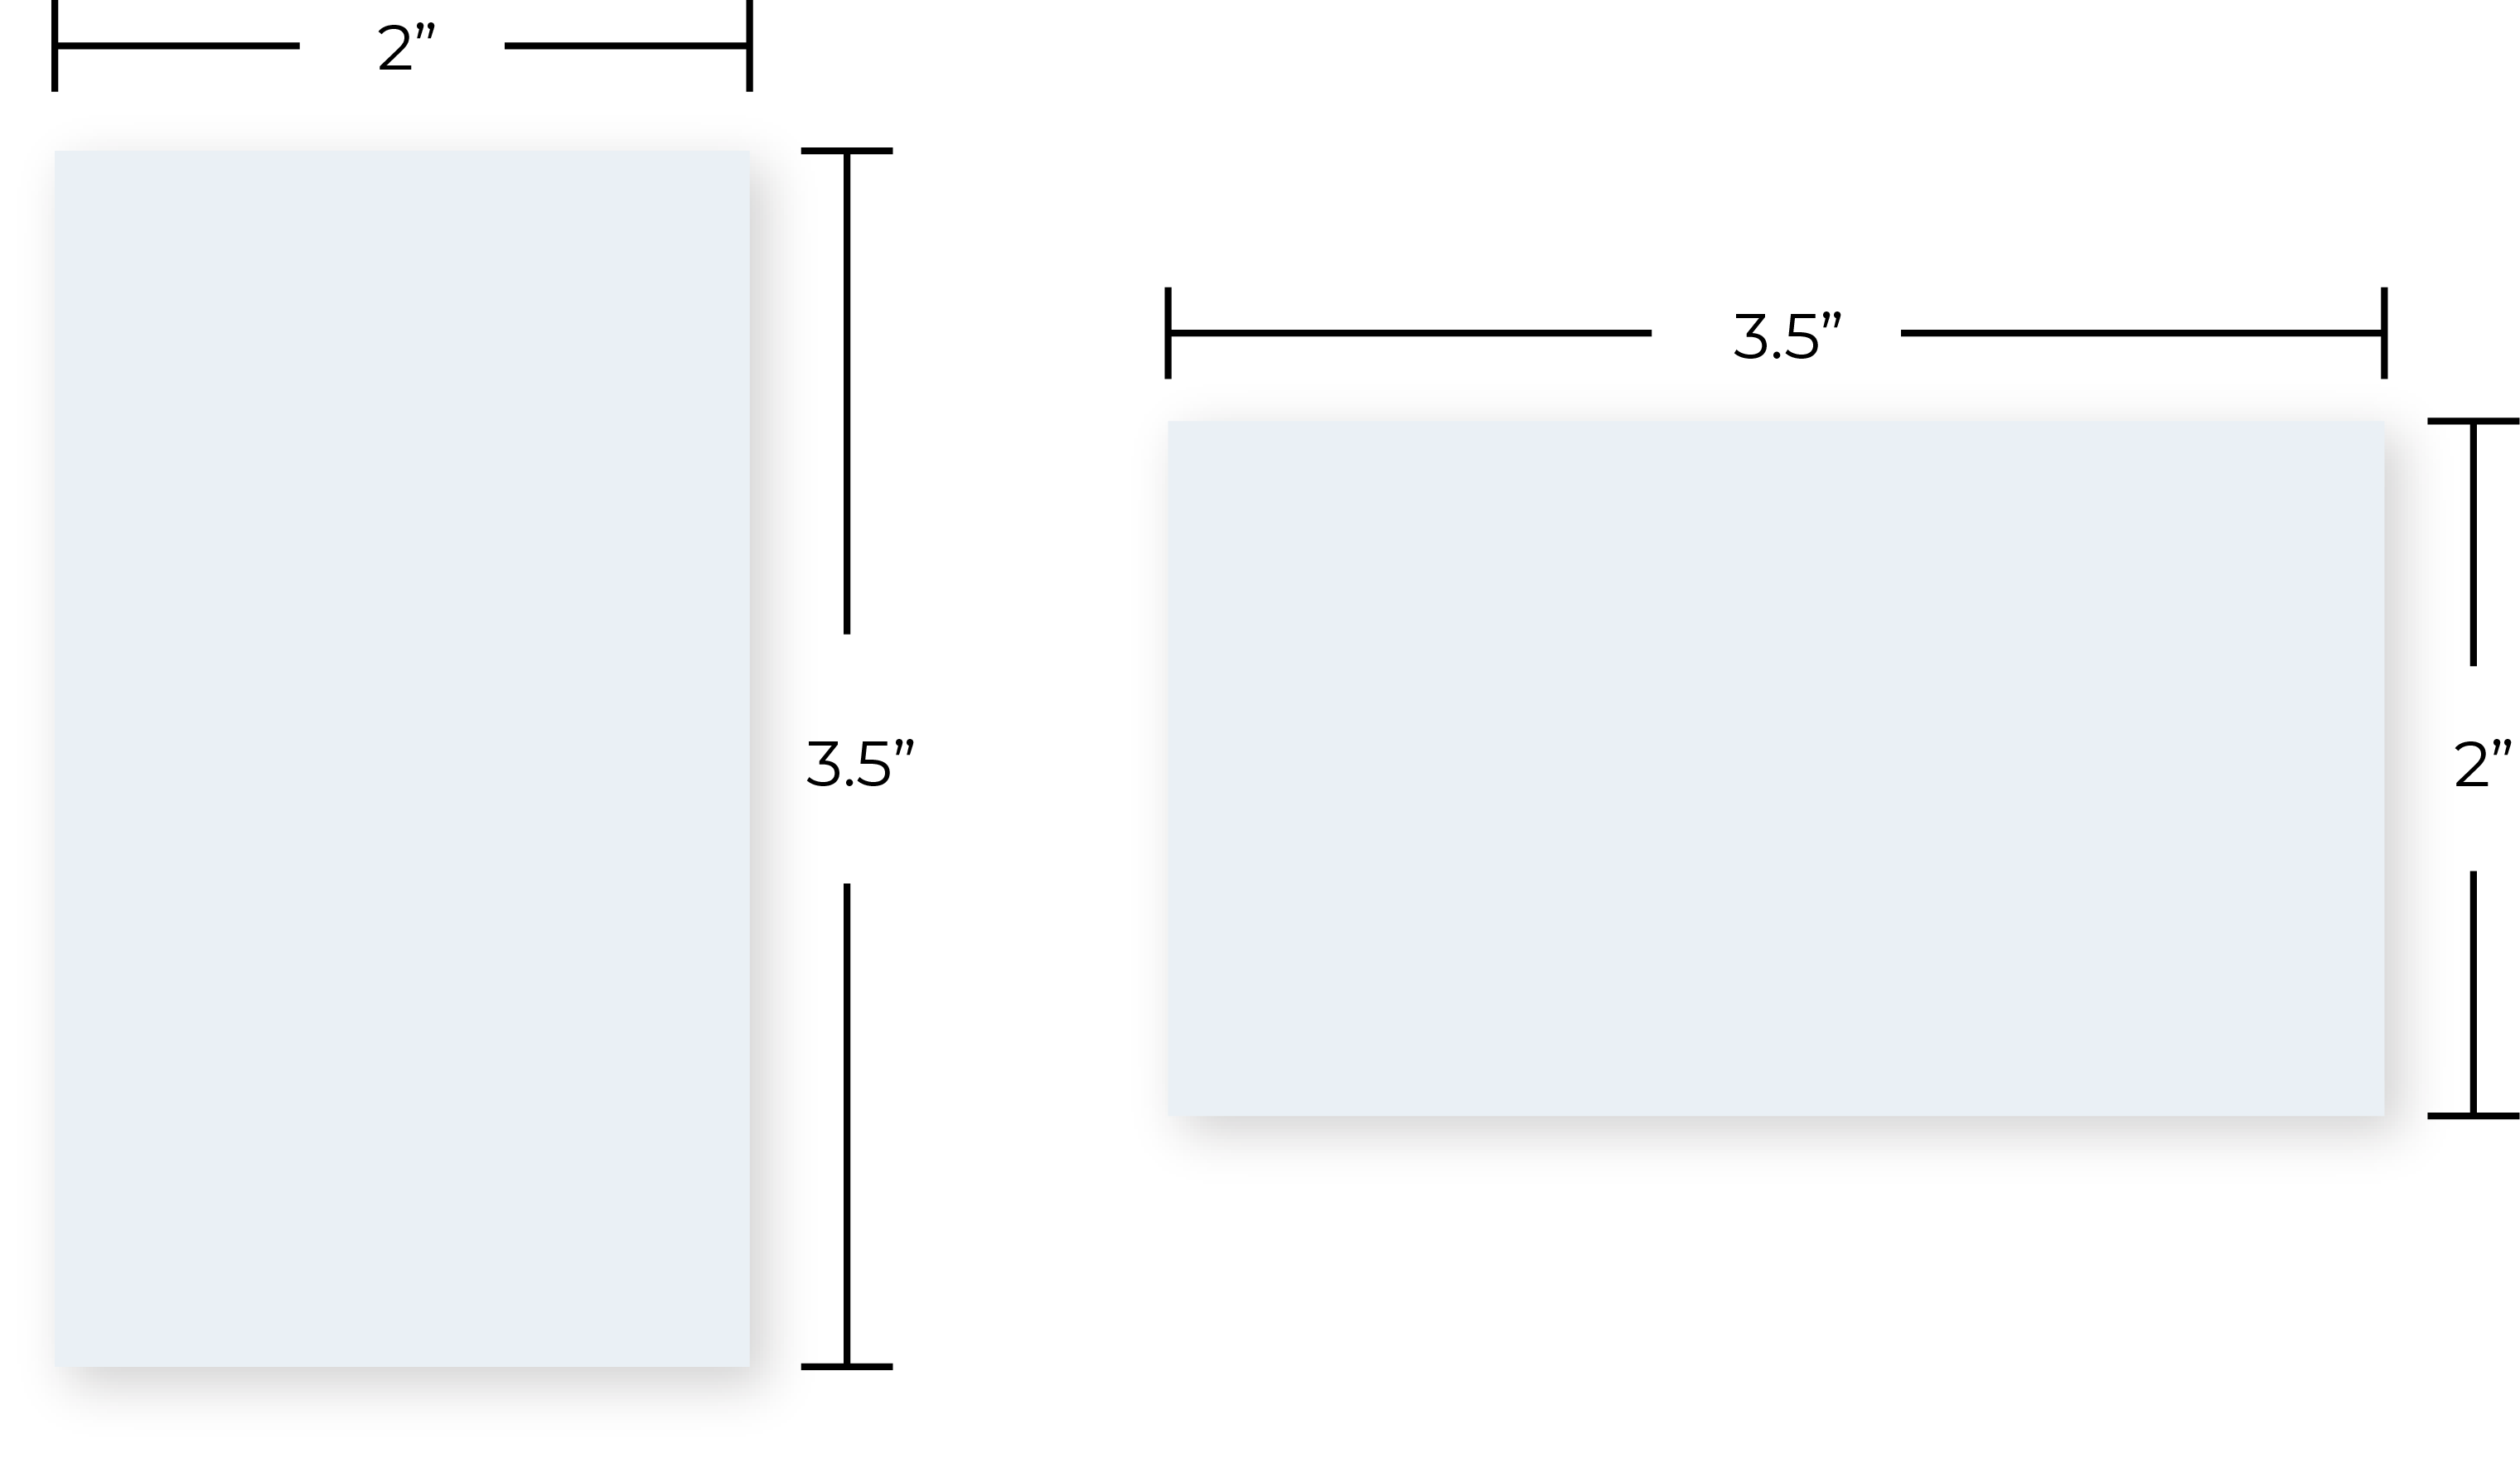 Vertical and horizontal card size